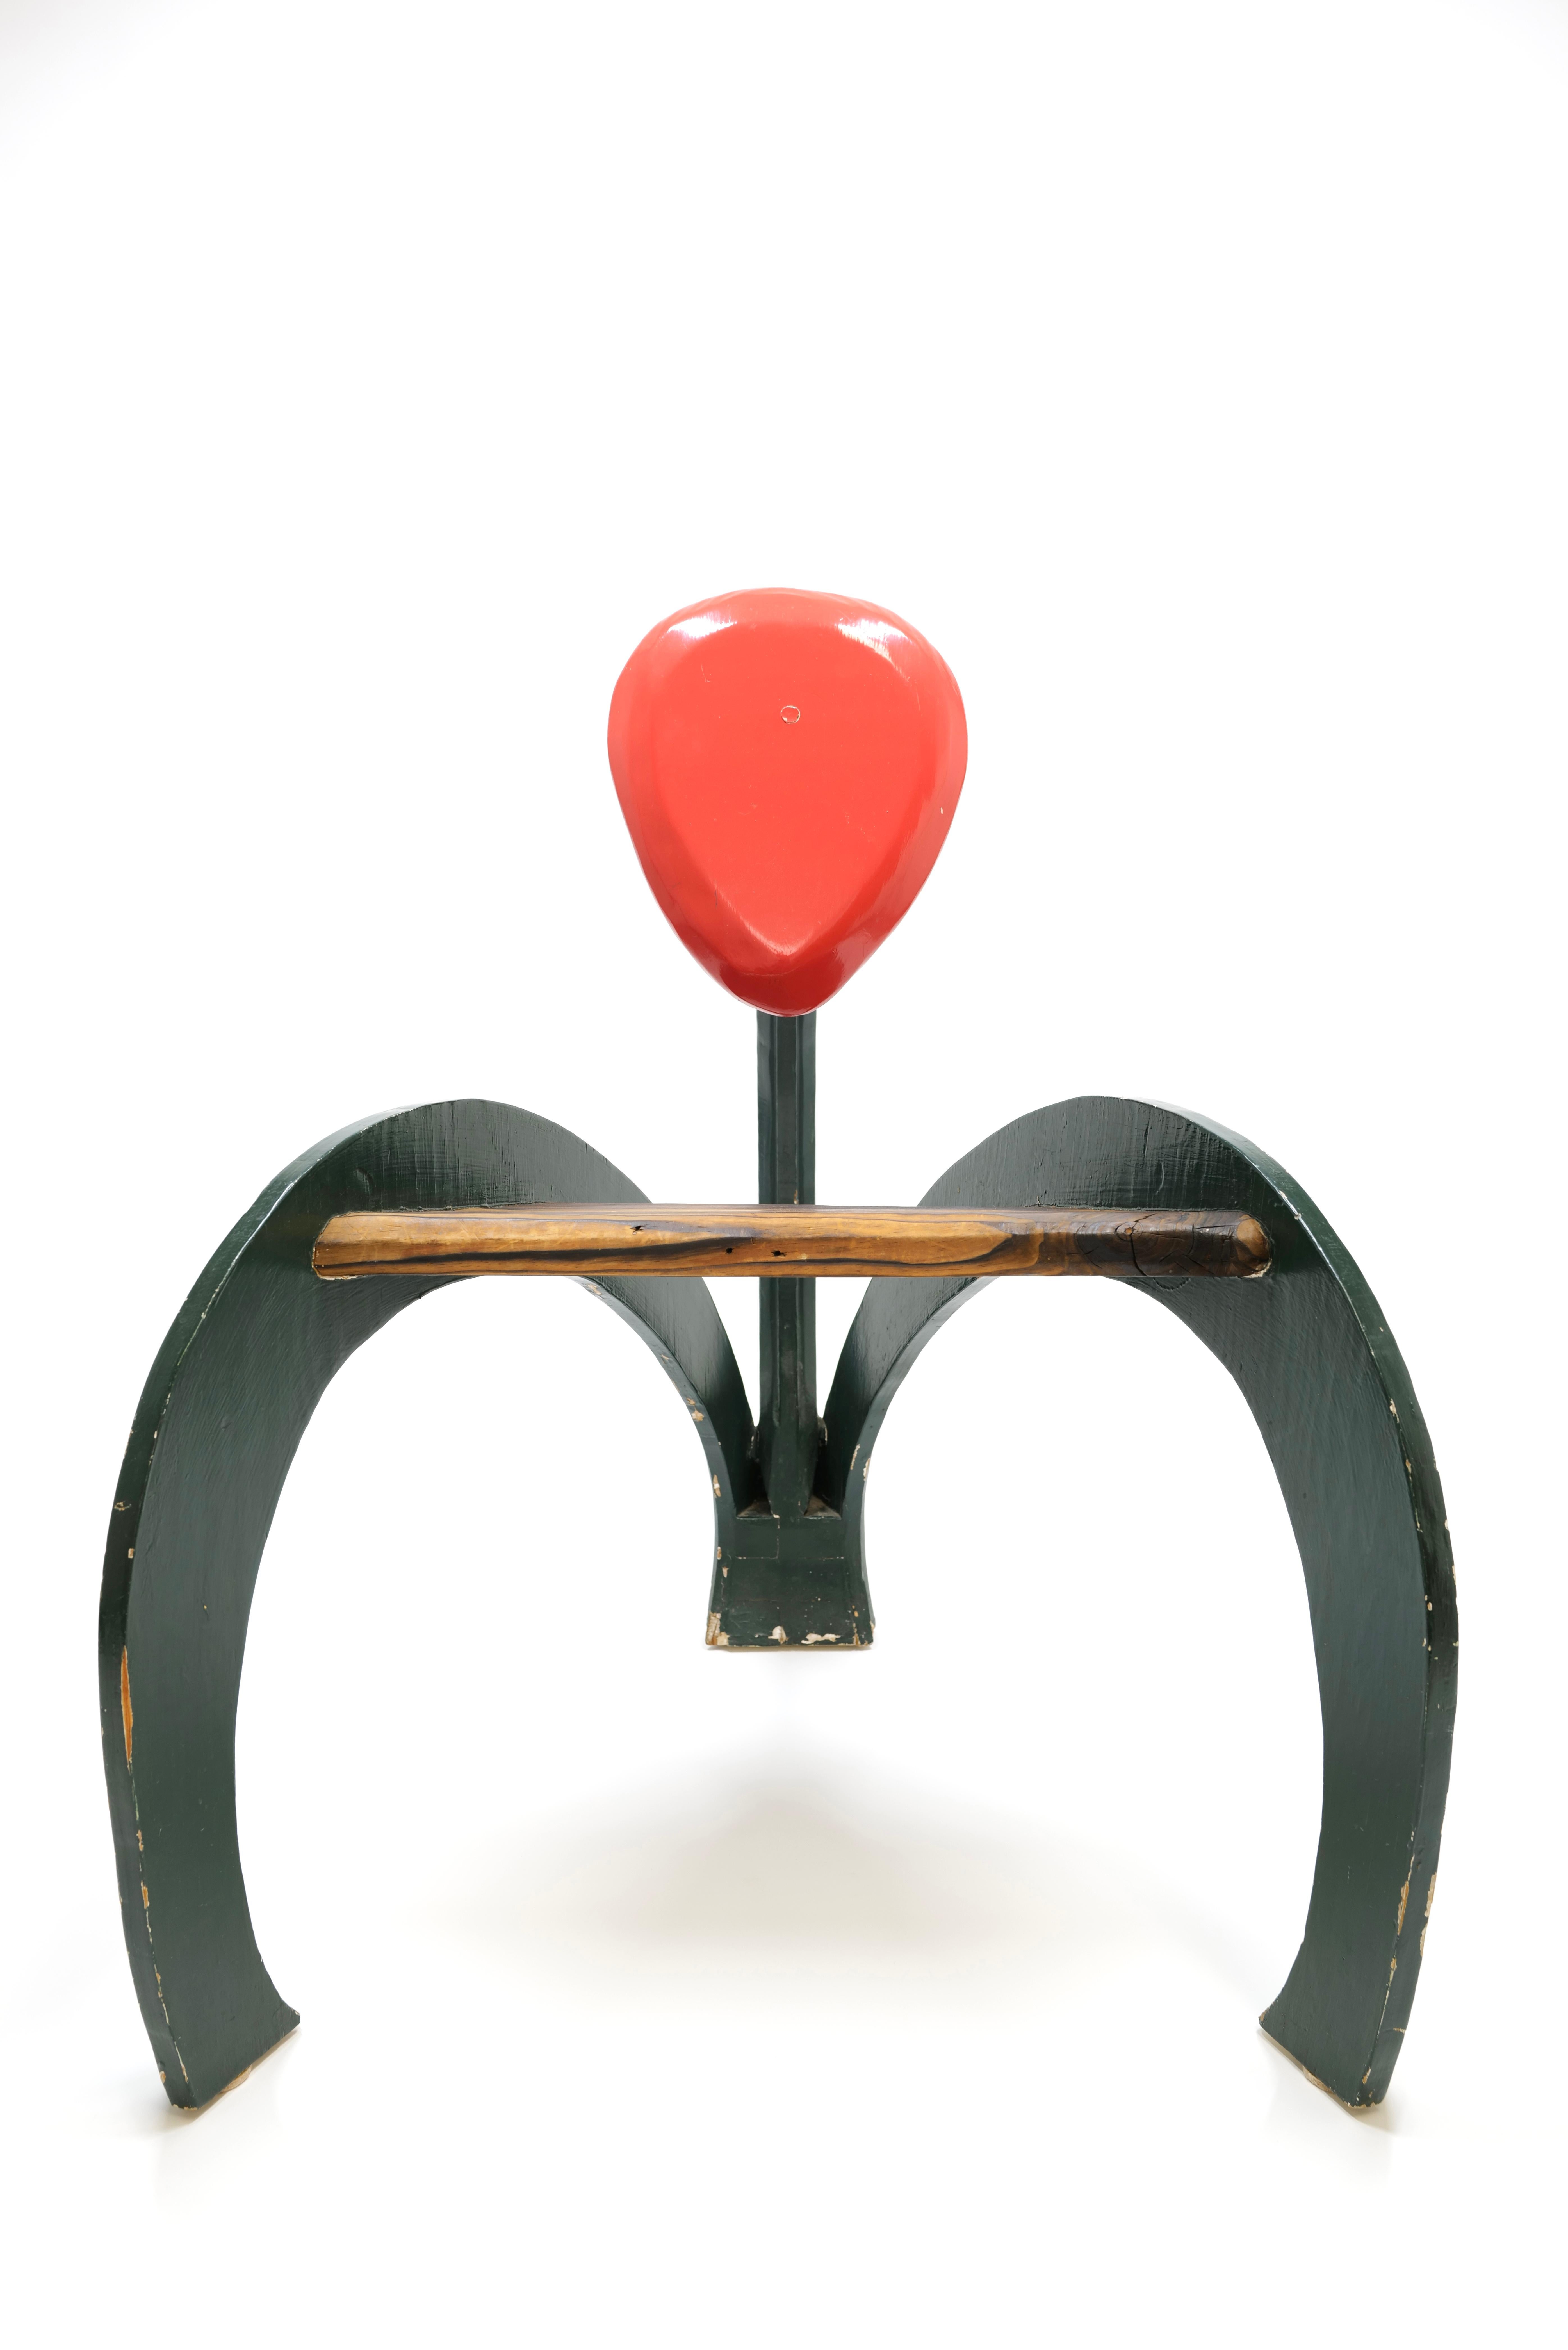 Mid-Century Modern Prototype Wood Chair Resembling a Flower Stamen For Sale